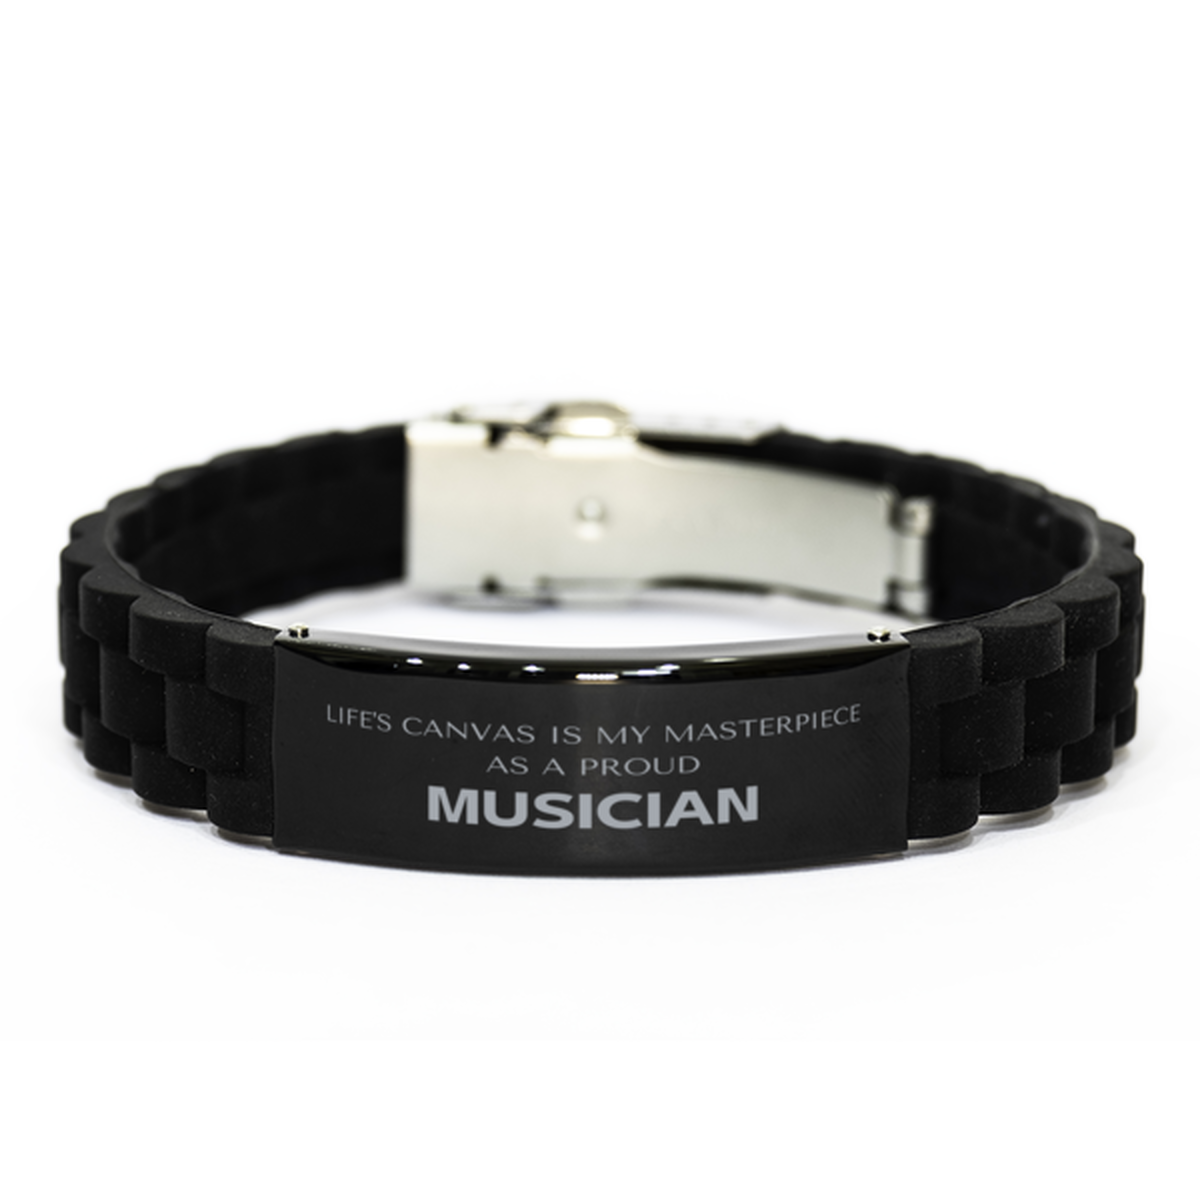 Proud Musician Gifts, Life's canvas is my masterpiece, Epic Birthday Christmas Unique Black Glidelock Clasp Bracelet For Musician, Coworkers, Men, Women, Friends